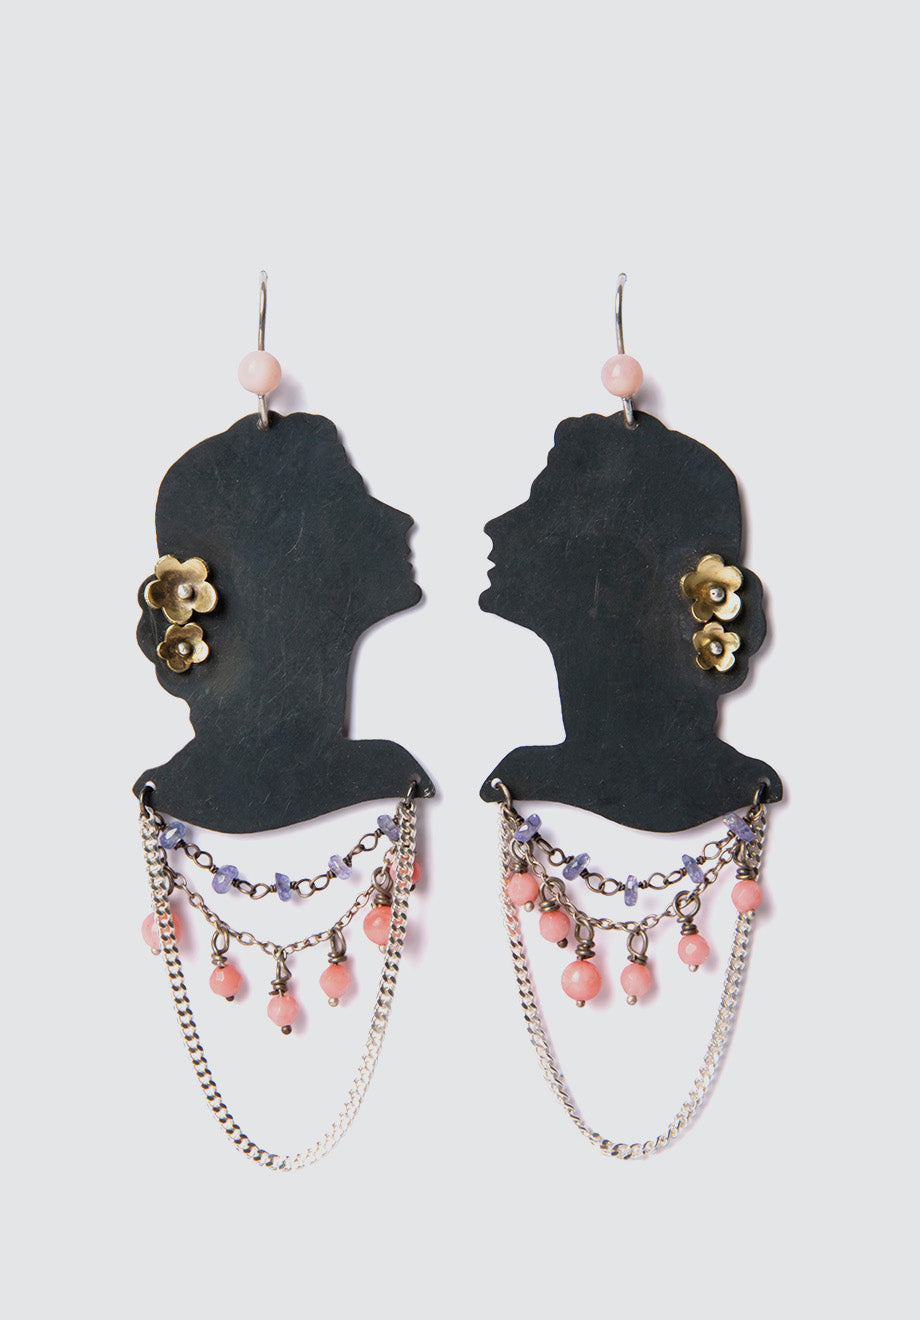 Silhouette Earrings with Chains & Beads